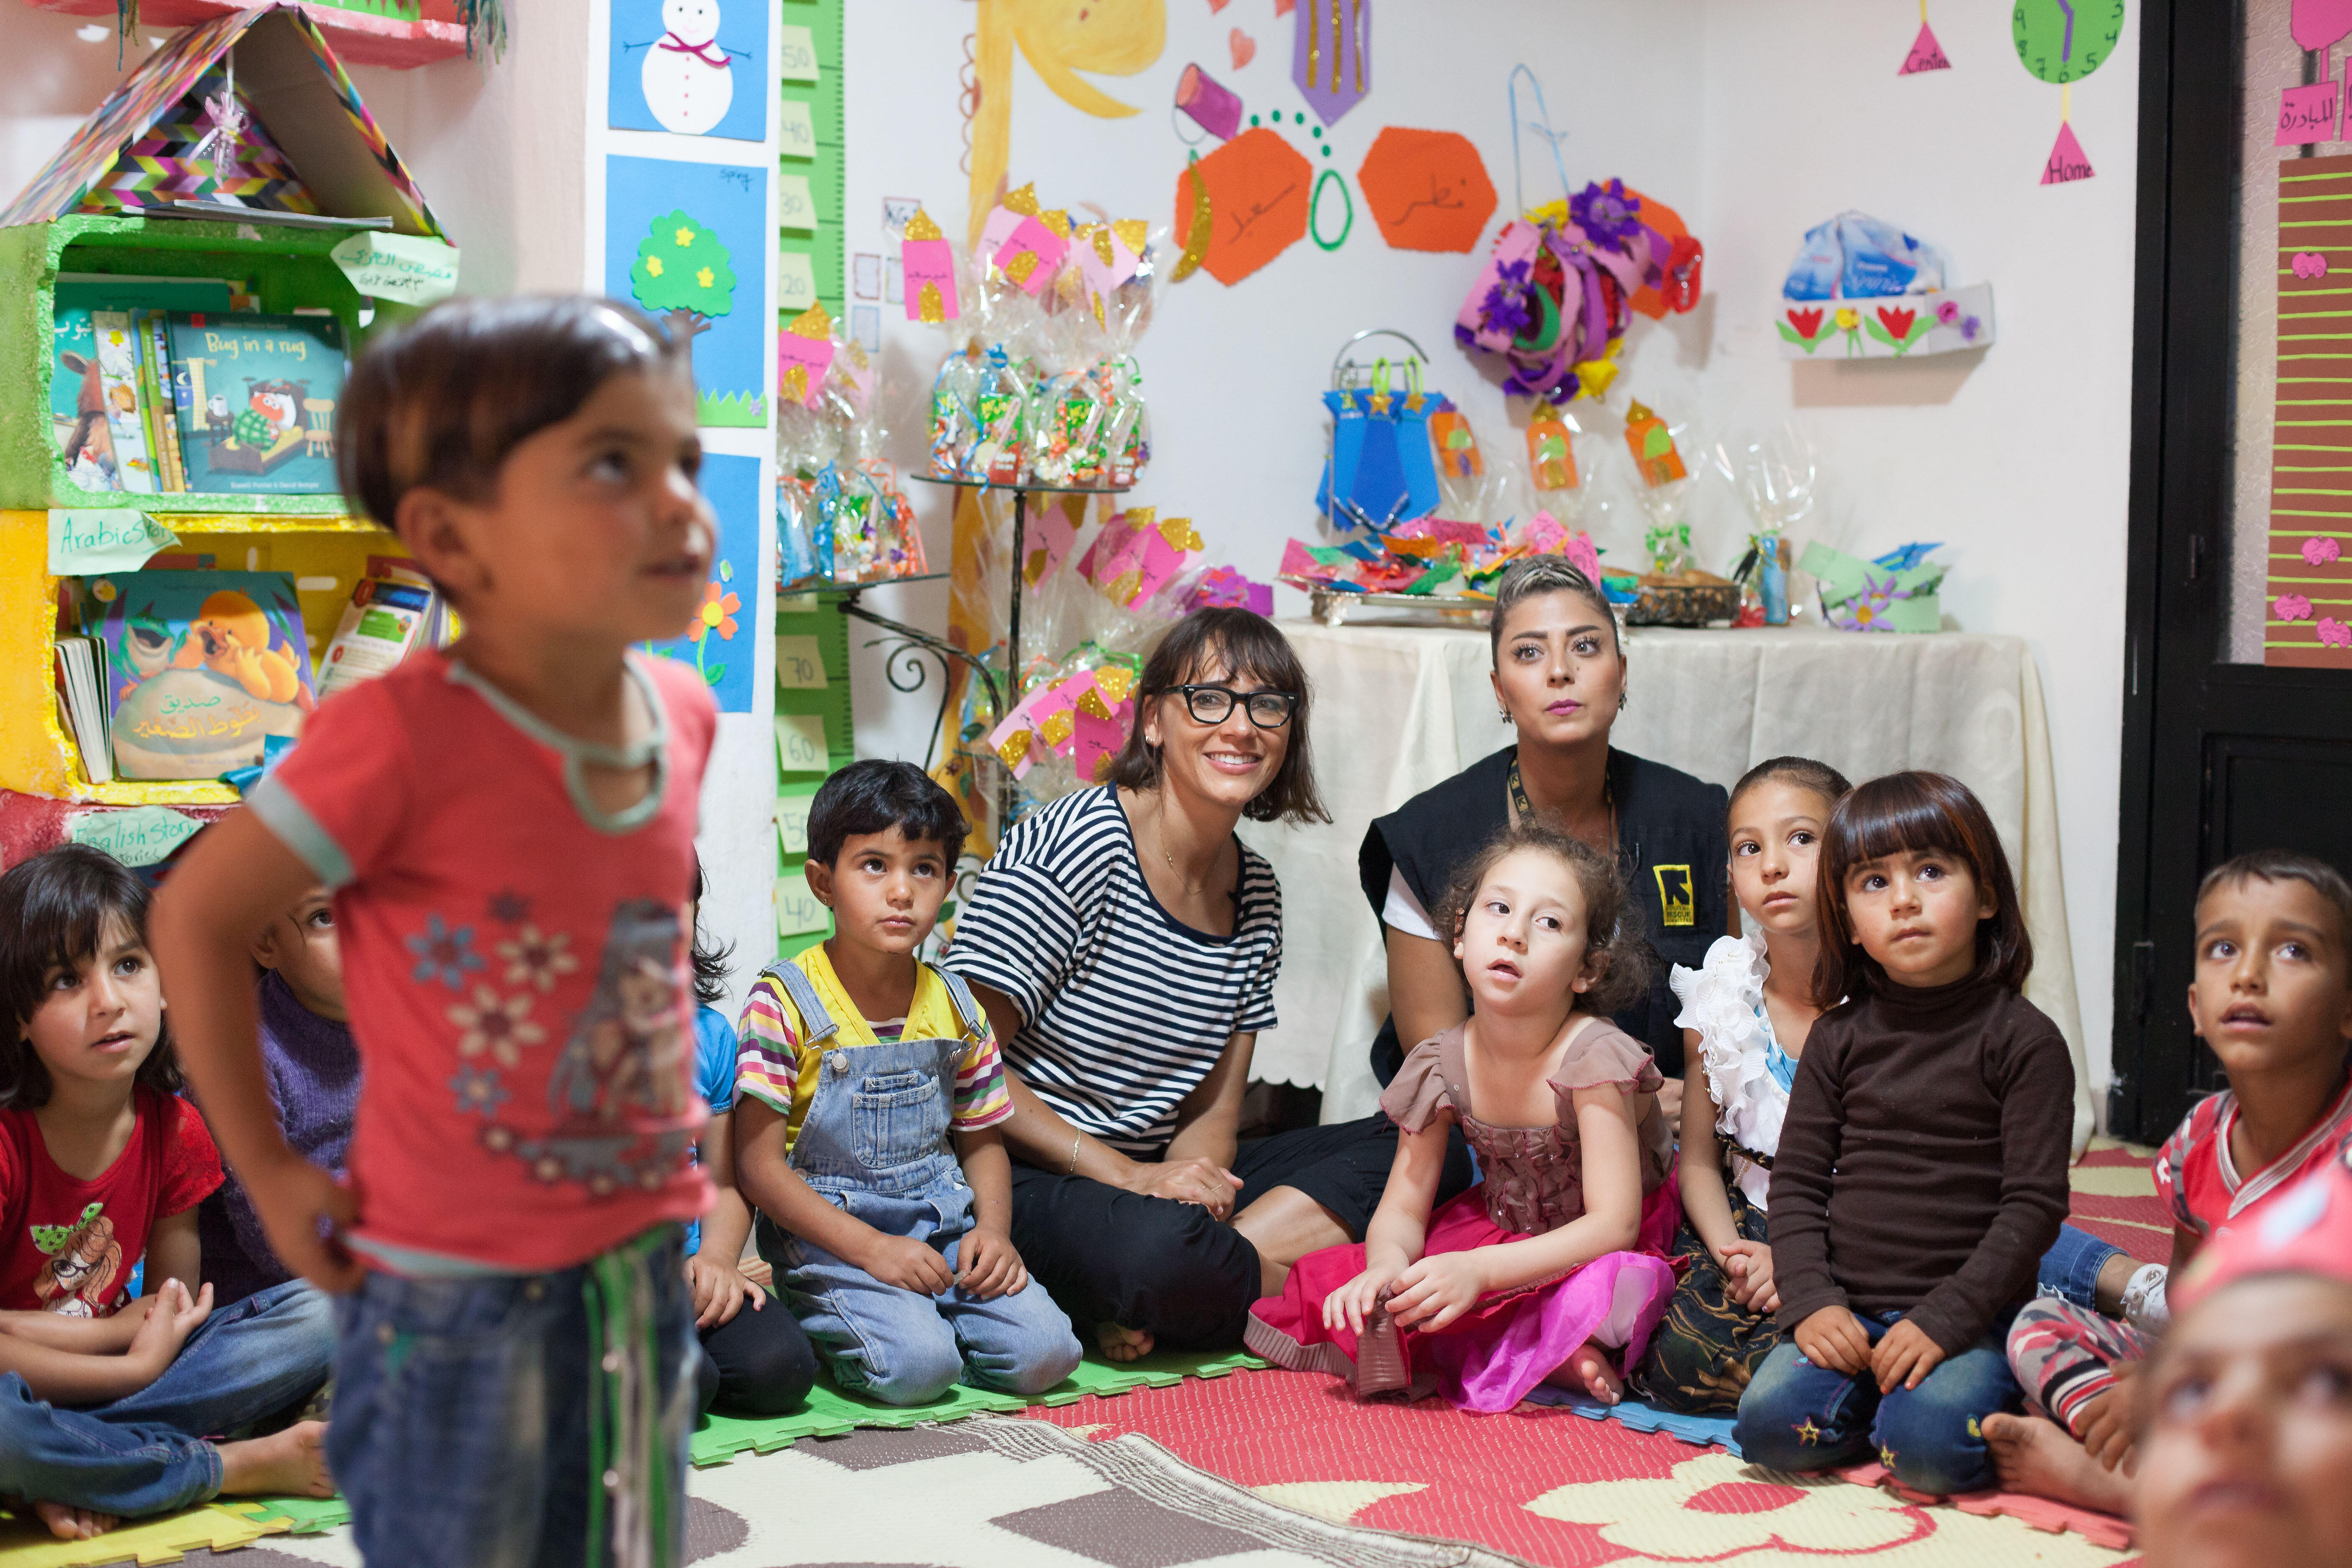 Rashida Jones sits with a small group of children at an IRC Safe Healing and Learning Space for young Syrian refugees in Lebanon.